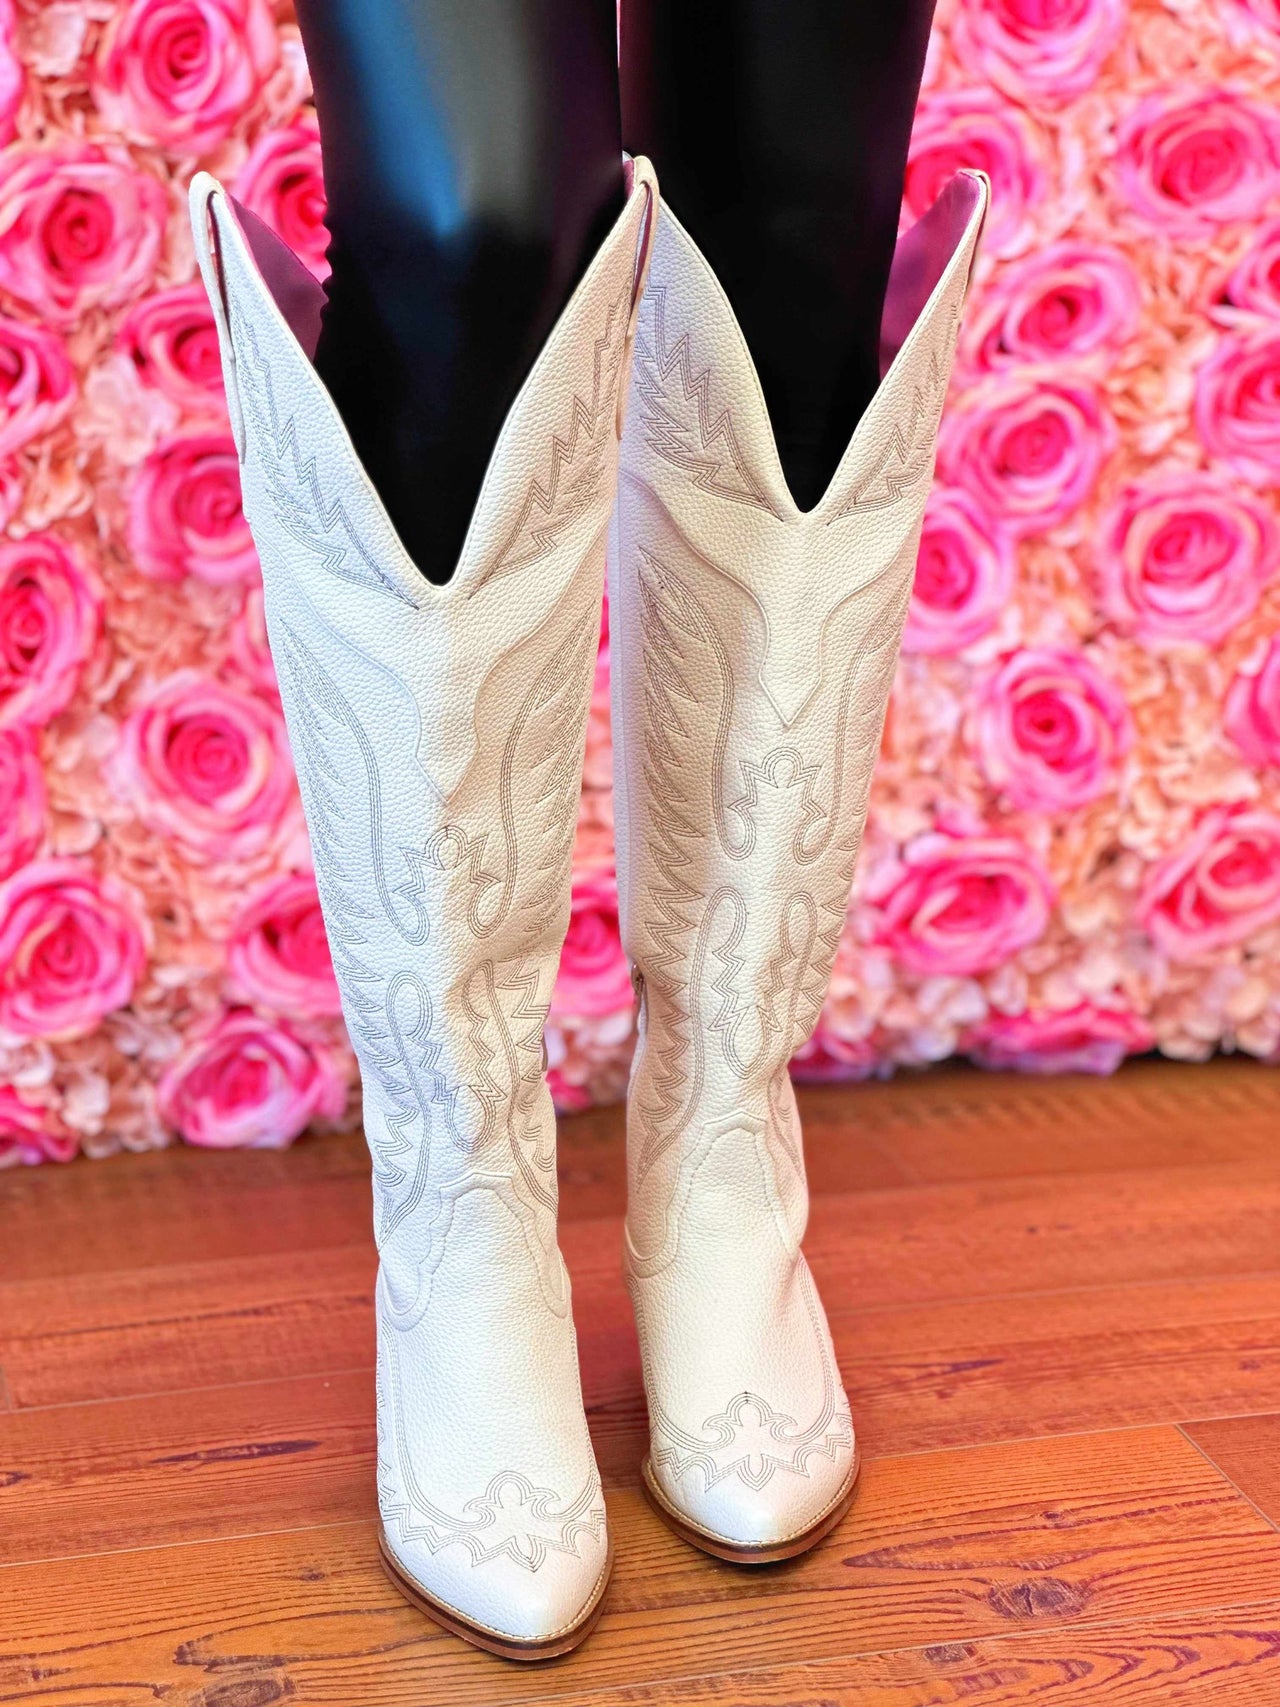 Knee high white cowgirl boots